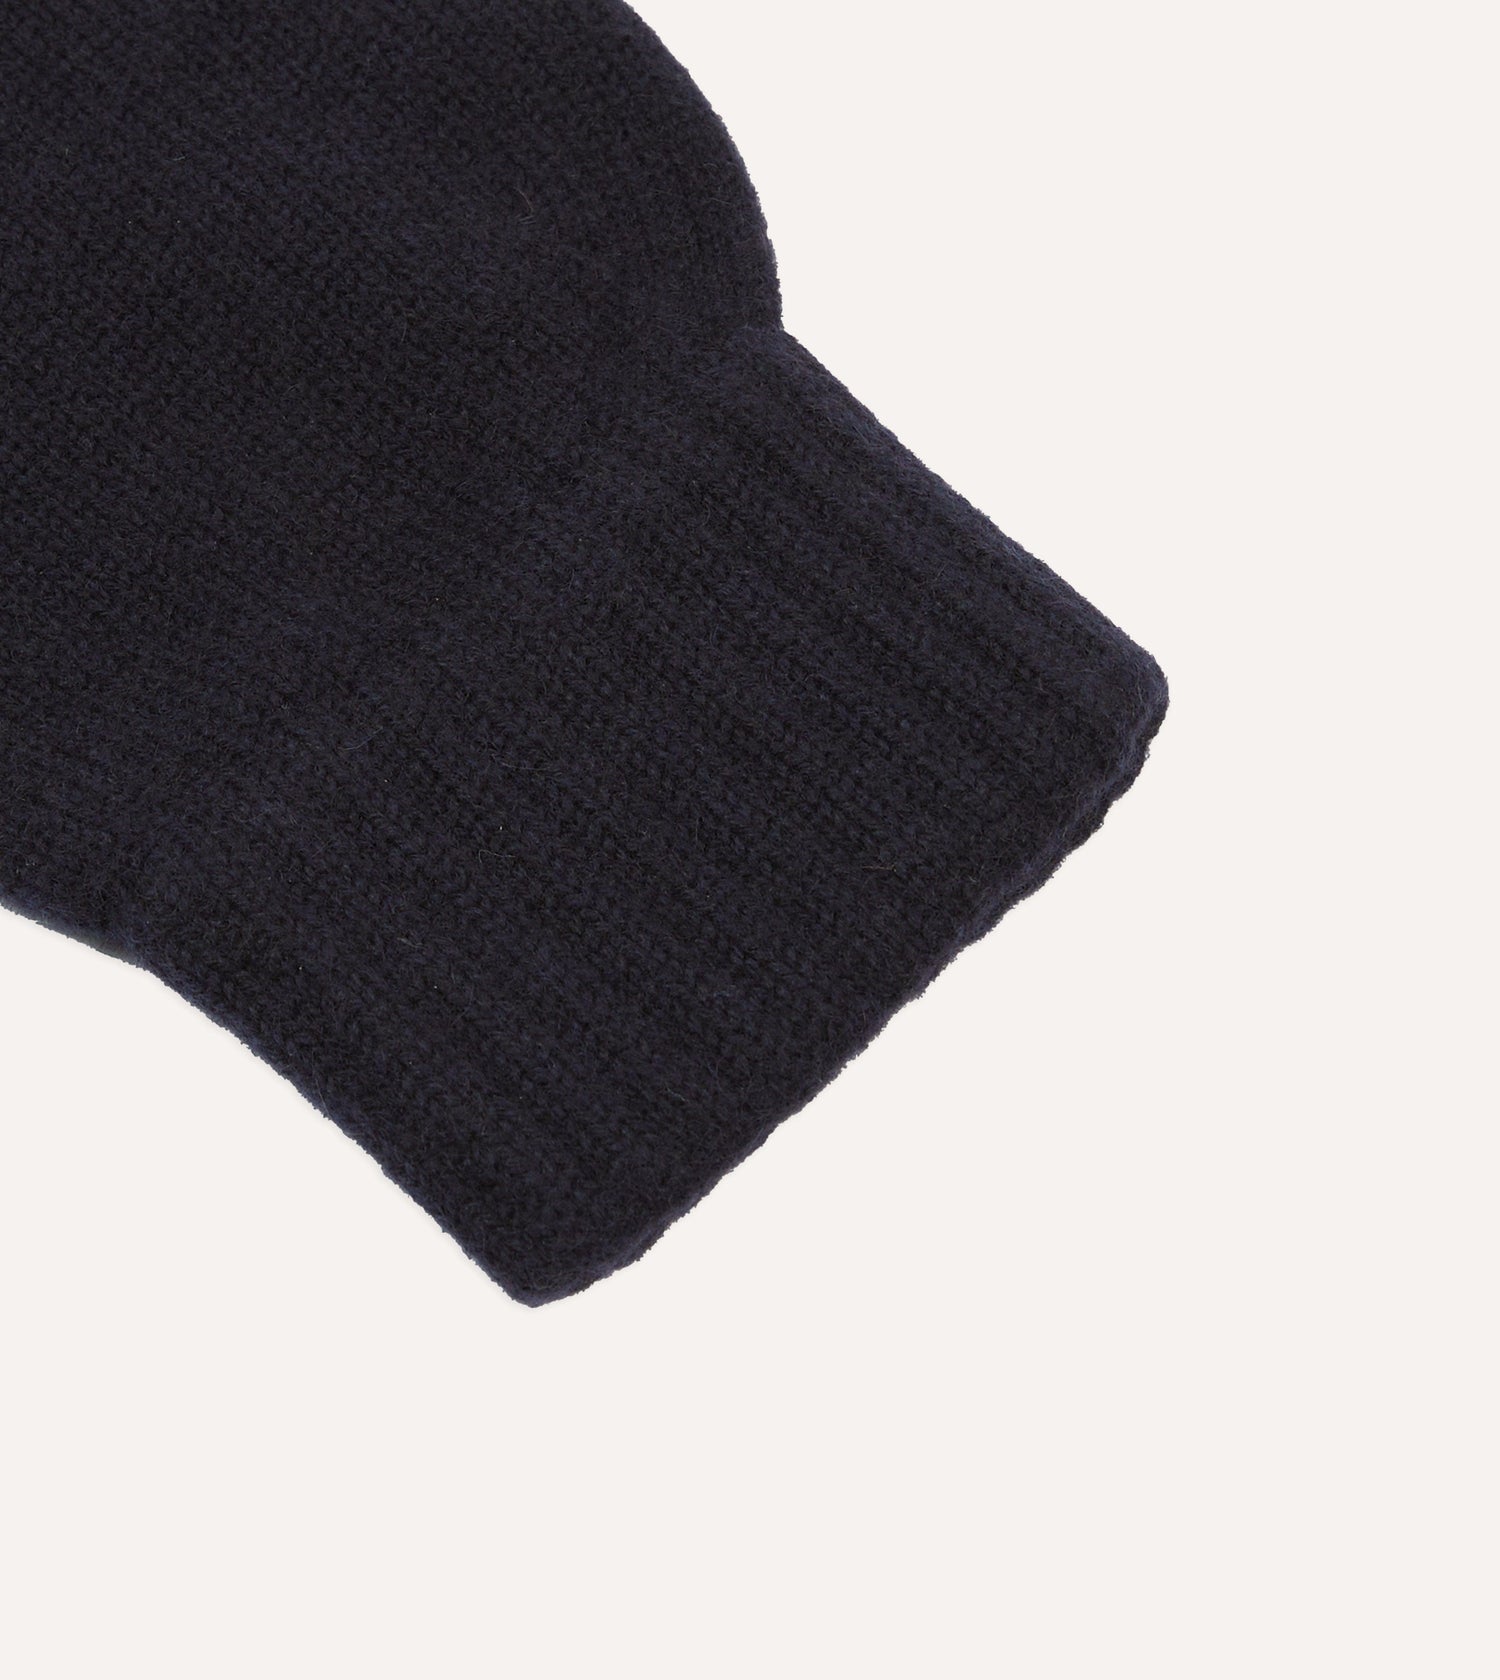 Navy Cashmere Knitted Gloves